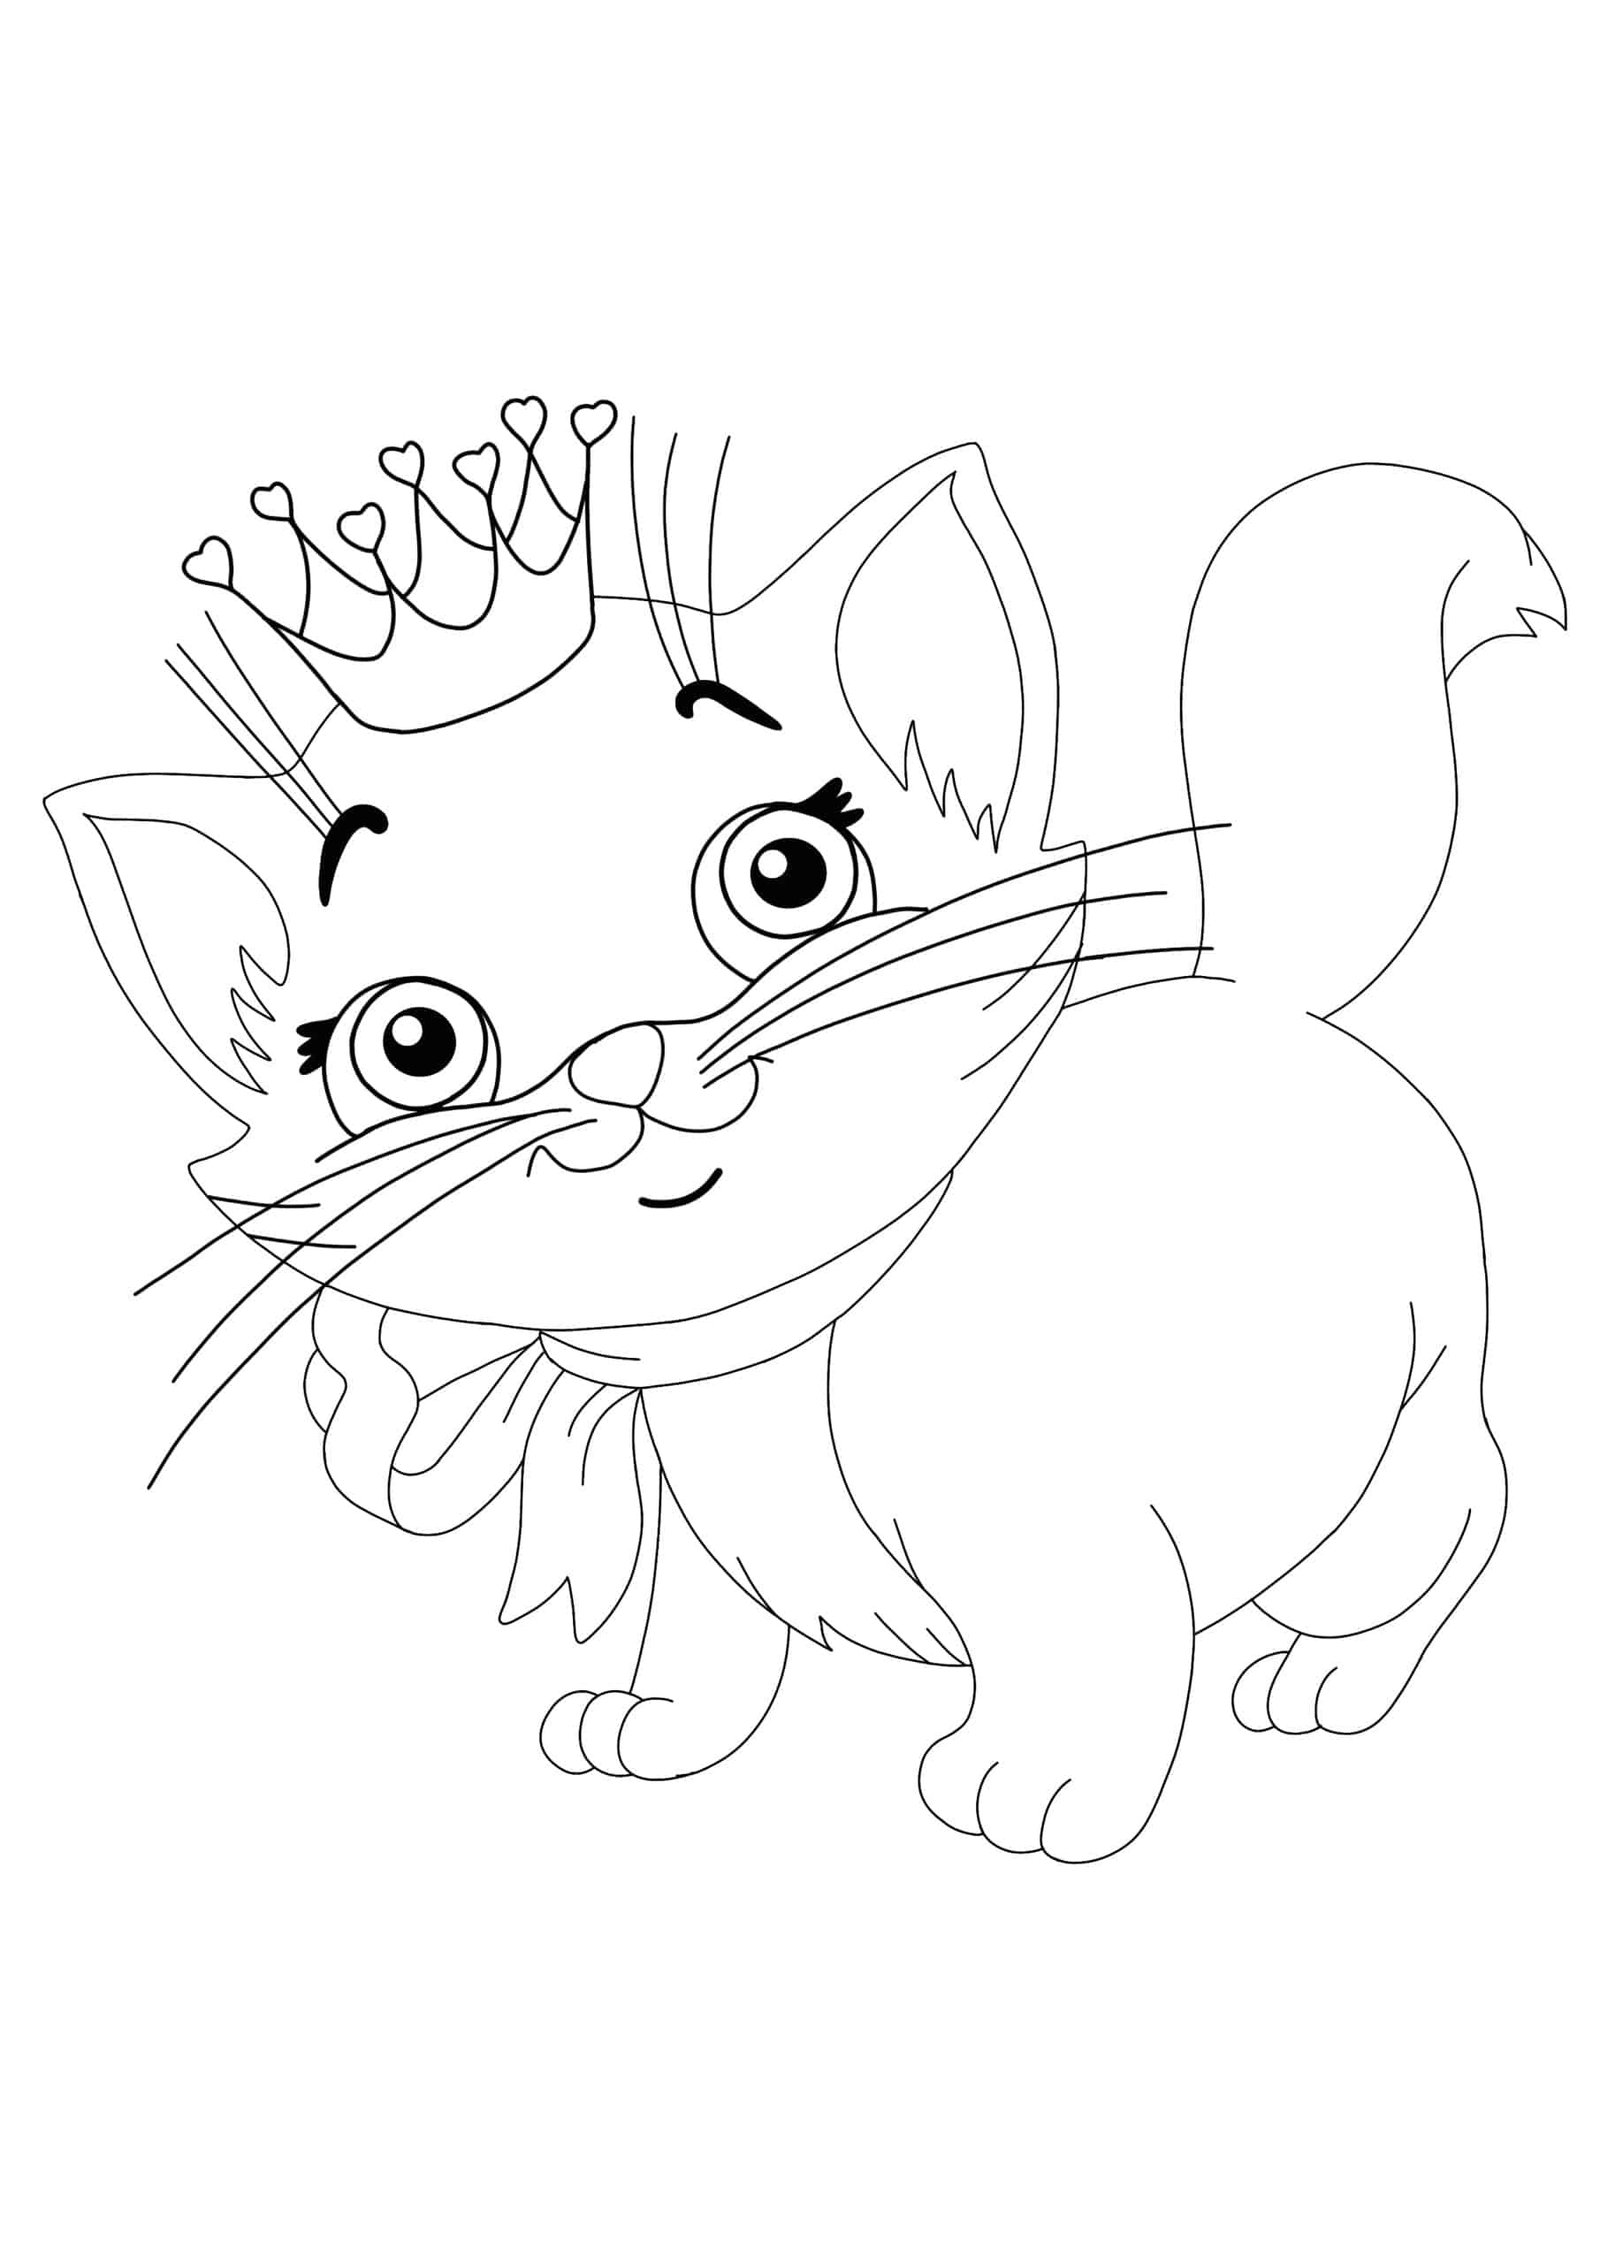 Kitty Cat With Crown coloring page